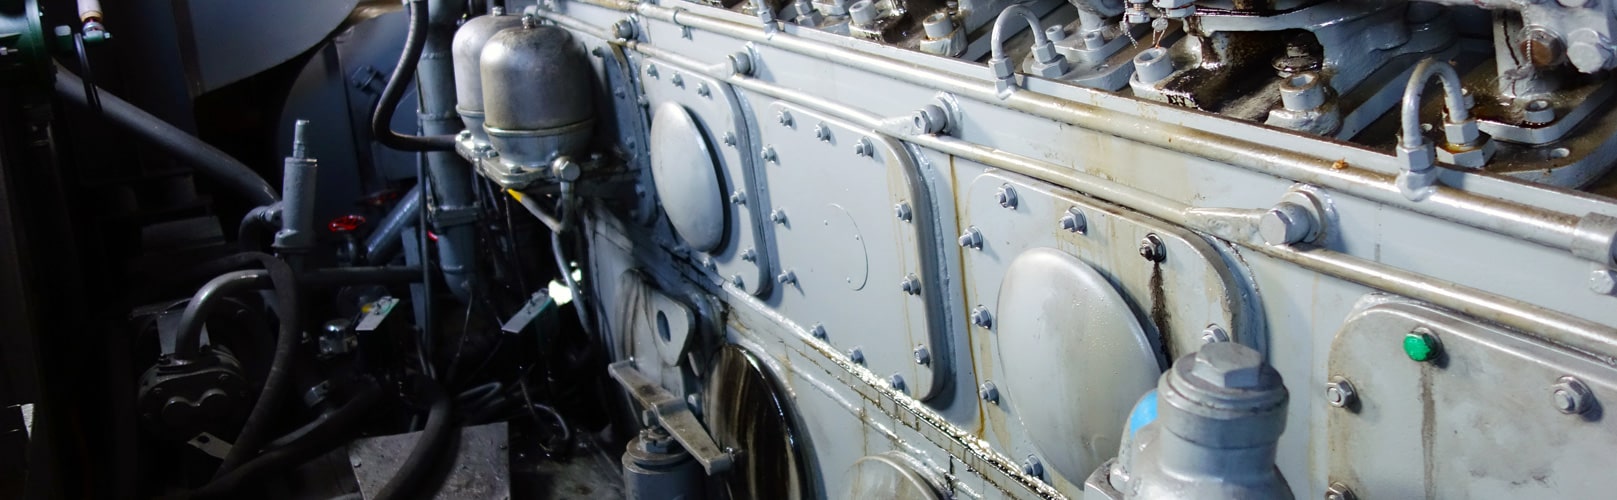 REDUCE INSTALLATION COSTS & DOWNTIME BY UPGRADING LOCOMOTIVE MAINTENANCE